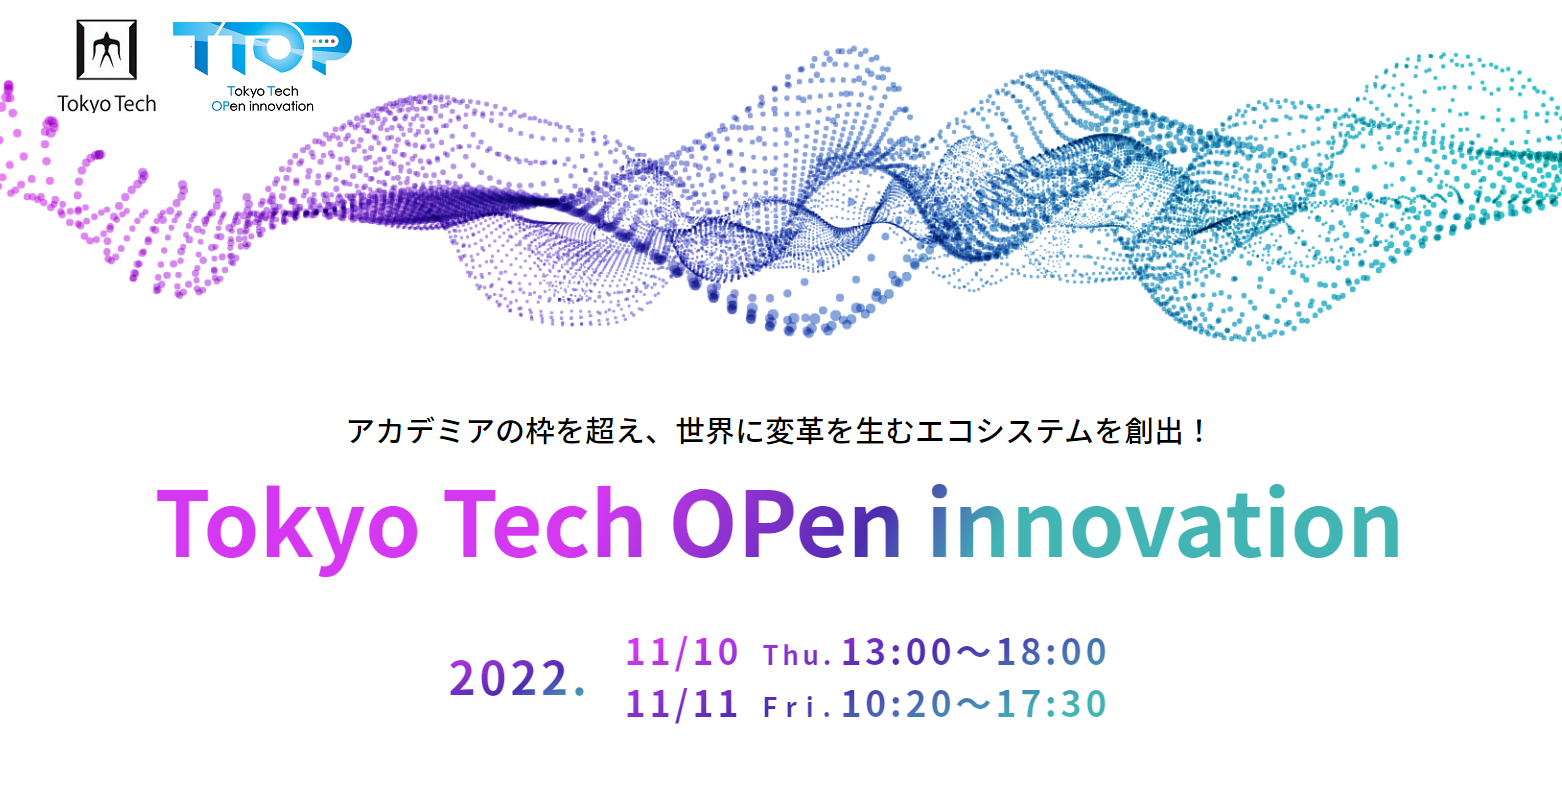 “Tokyo Tech OPen innovation & venture/research festival (TTOP) 2021”, the largest industry-university collaboration events at Tokyo Tech, held on Nov. 25-26, 2021.